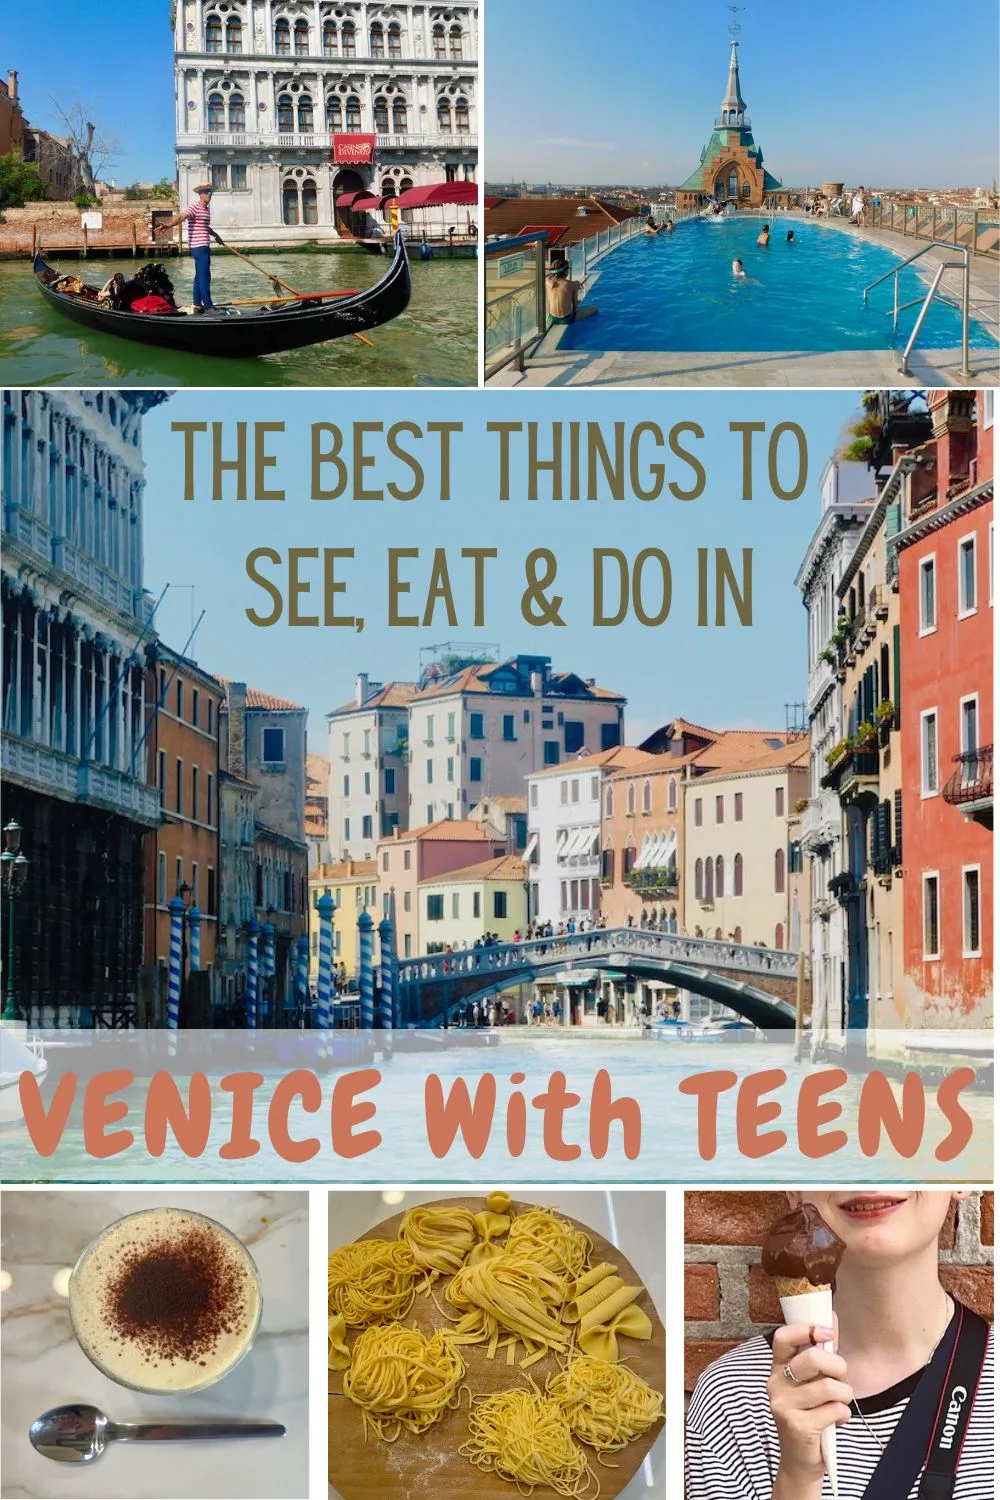 venice is mesmerizing. here are the best things to see, eat & do for an unforgettable visit with teens. plus, a great hotel, shopping ideas & packing tips!